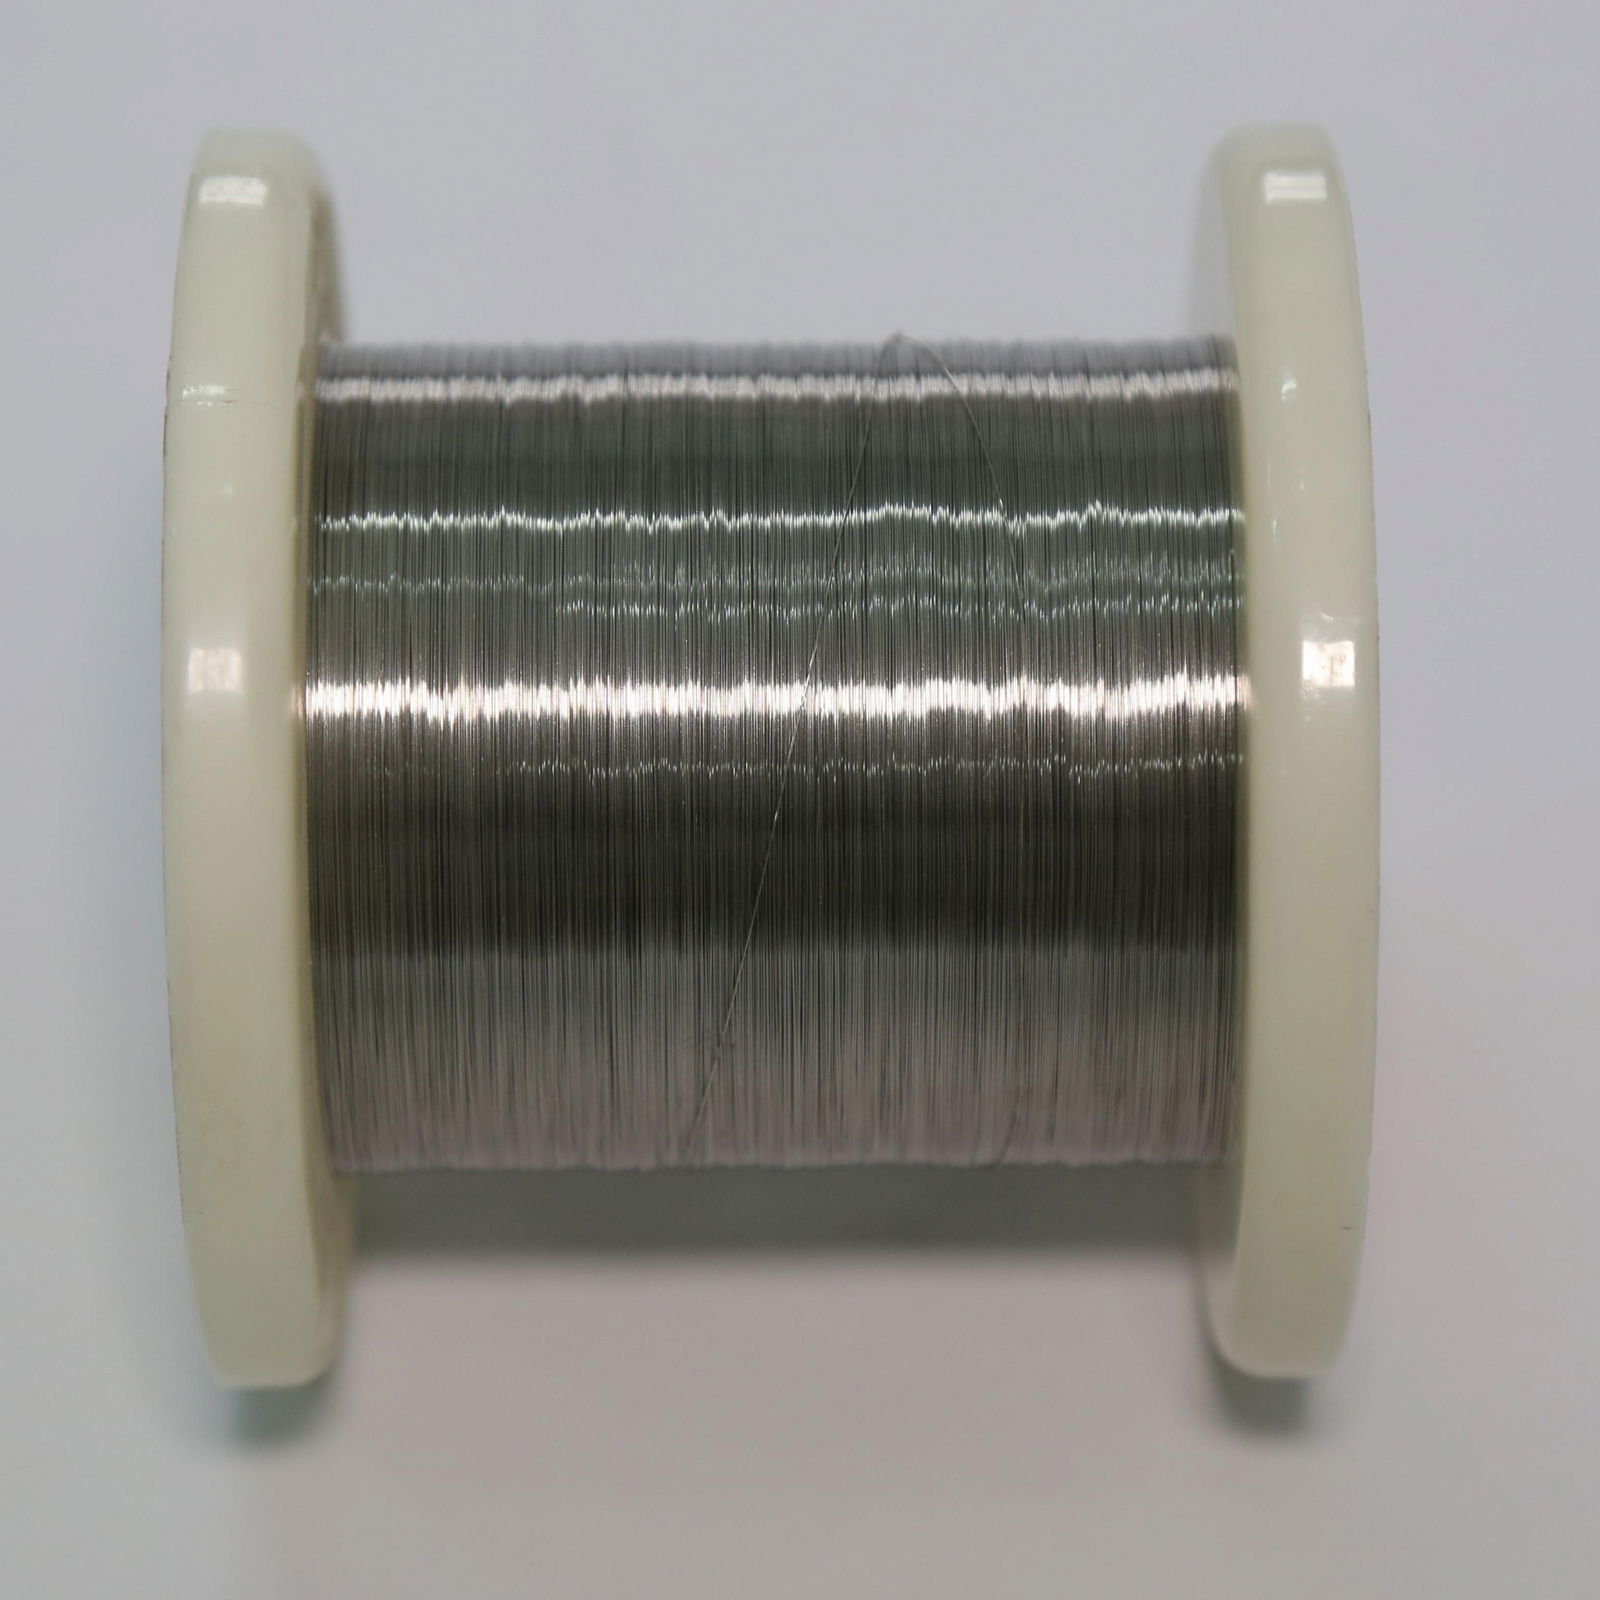 Copper Nickel CuNi1 Alloy Wire Resistance Wire 3